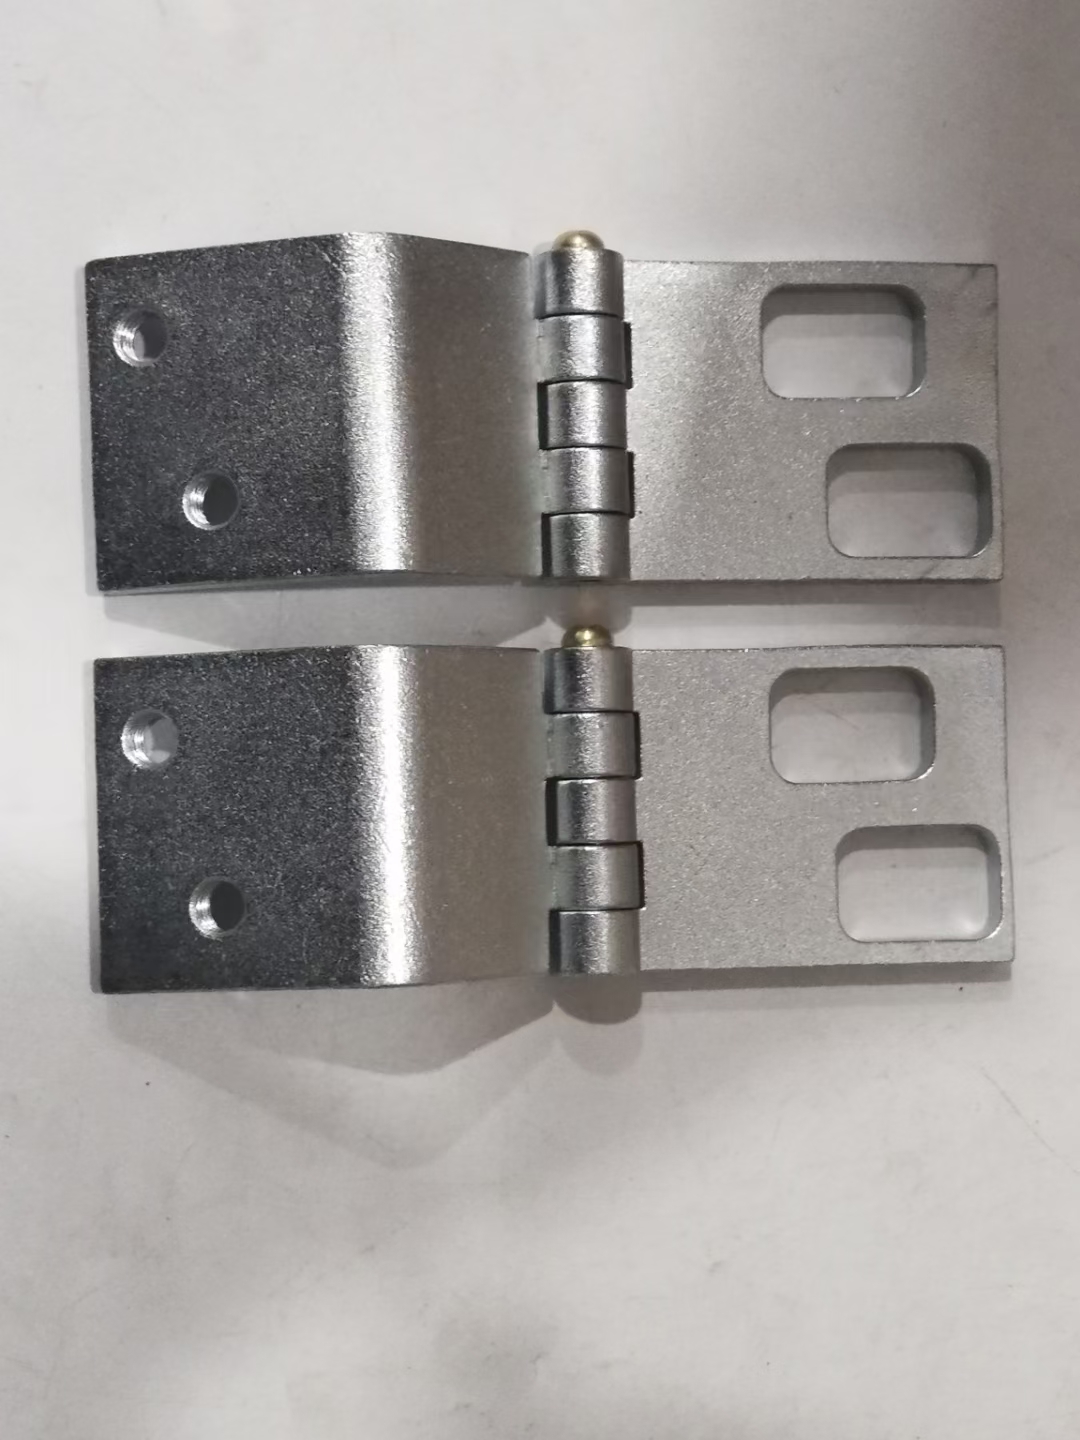 CUSTOM INDUSTRIAL HINGES FOR YOU JUST